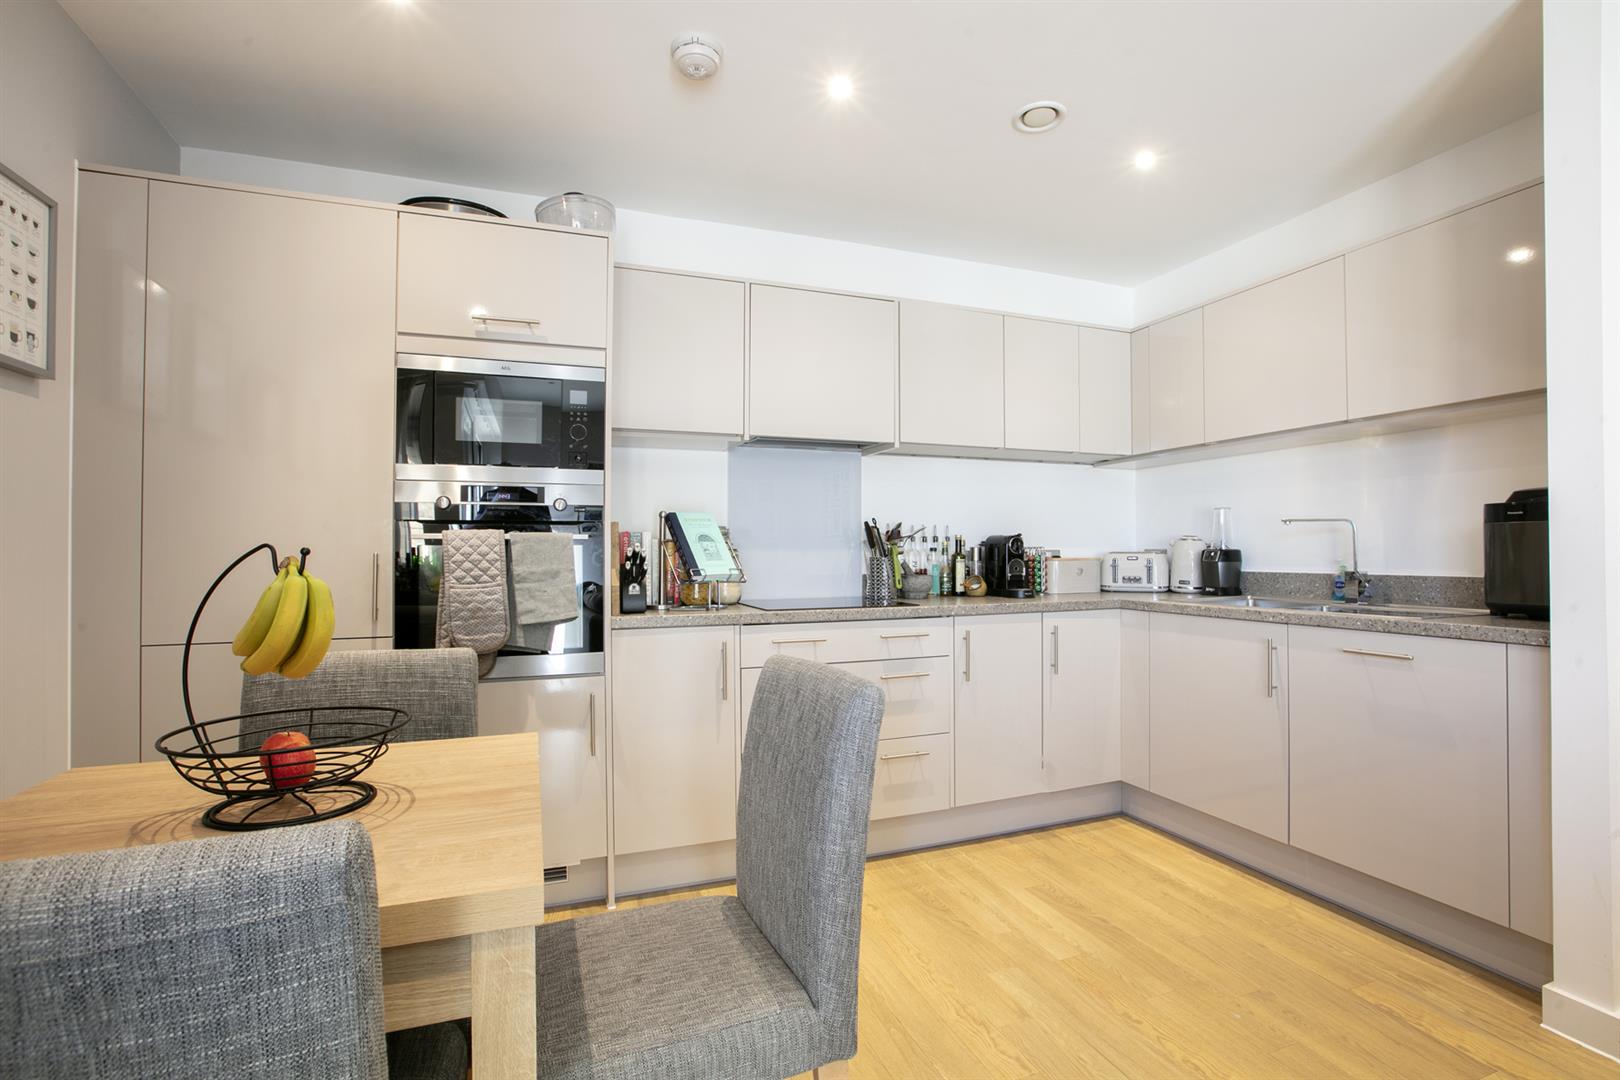 Flat - Purpose Built For Sale in Elmington Road, Camberwell, SE5 904 view10